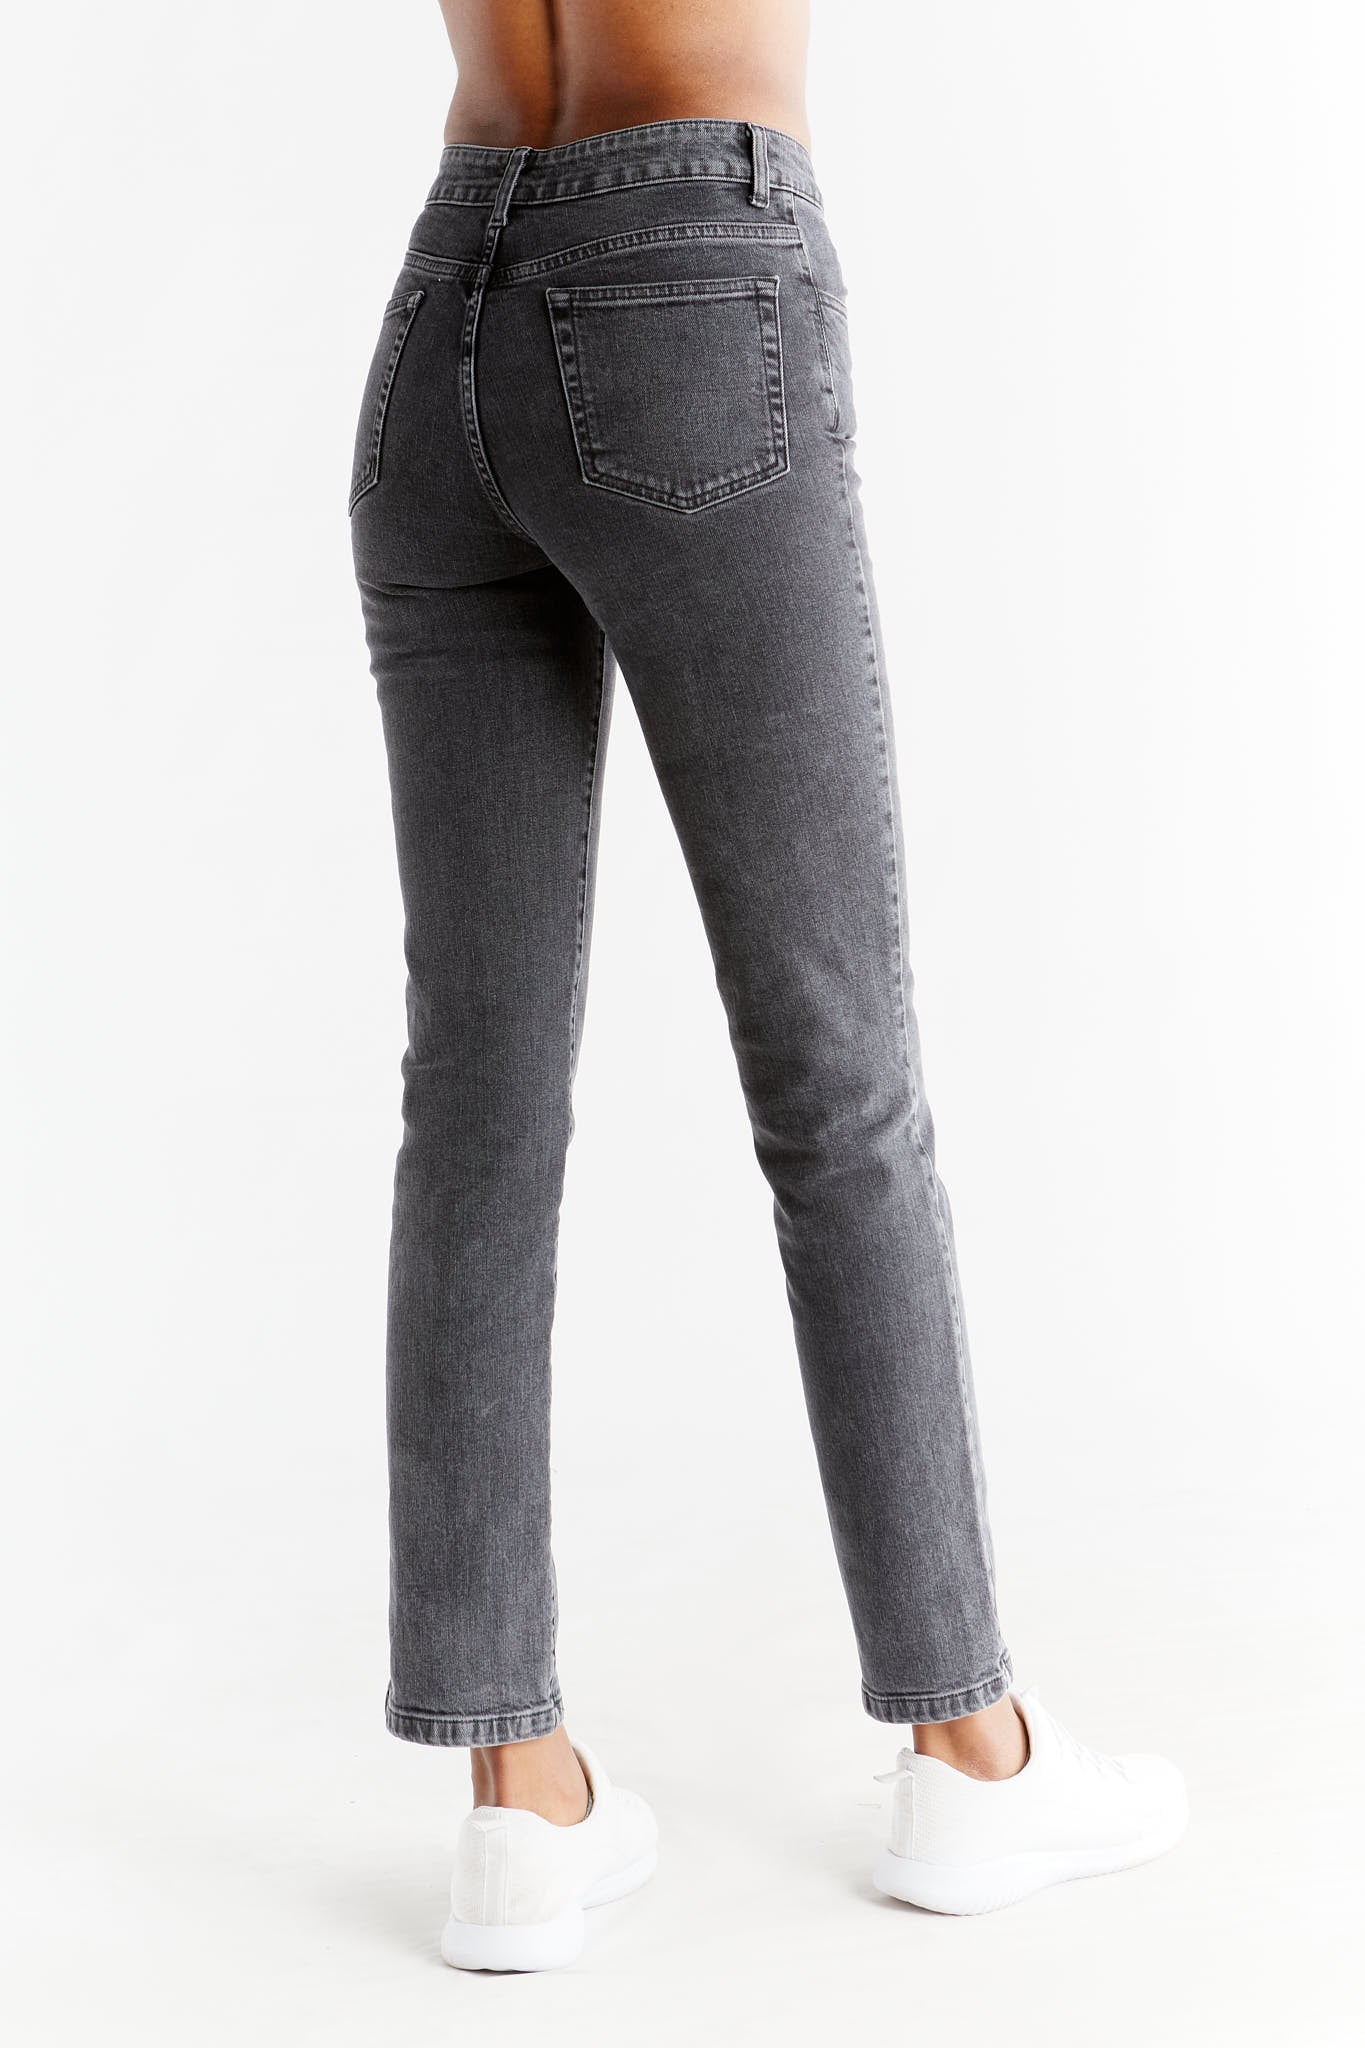 WQ1010-145 | Women Straight Fit - Carbon Gray